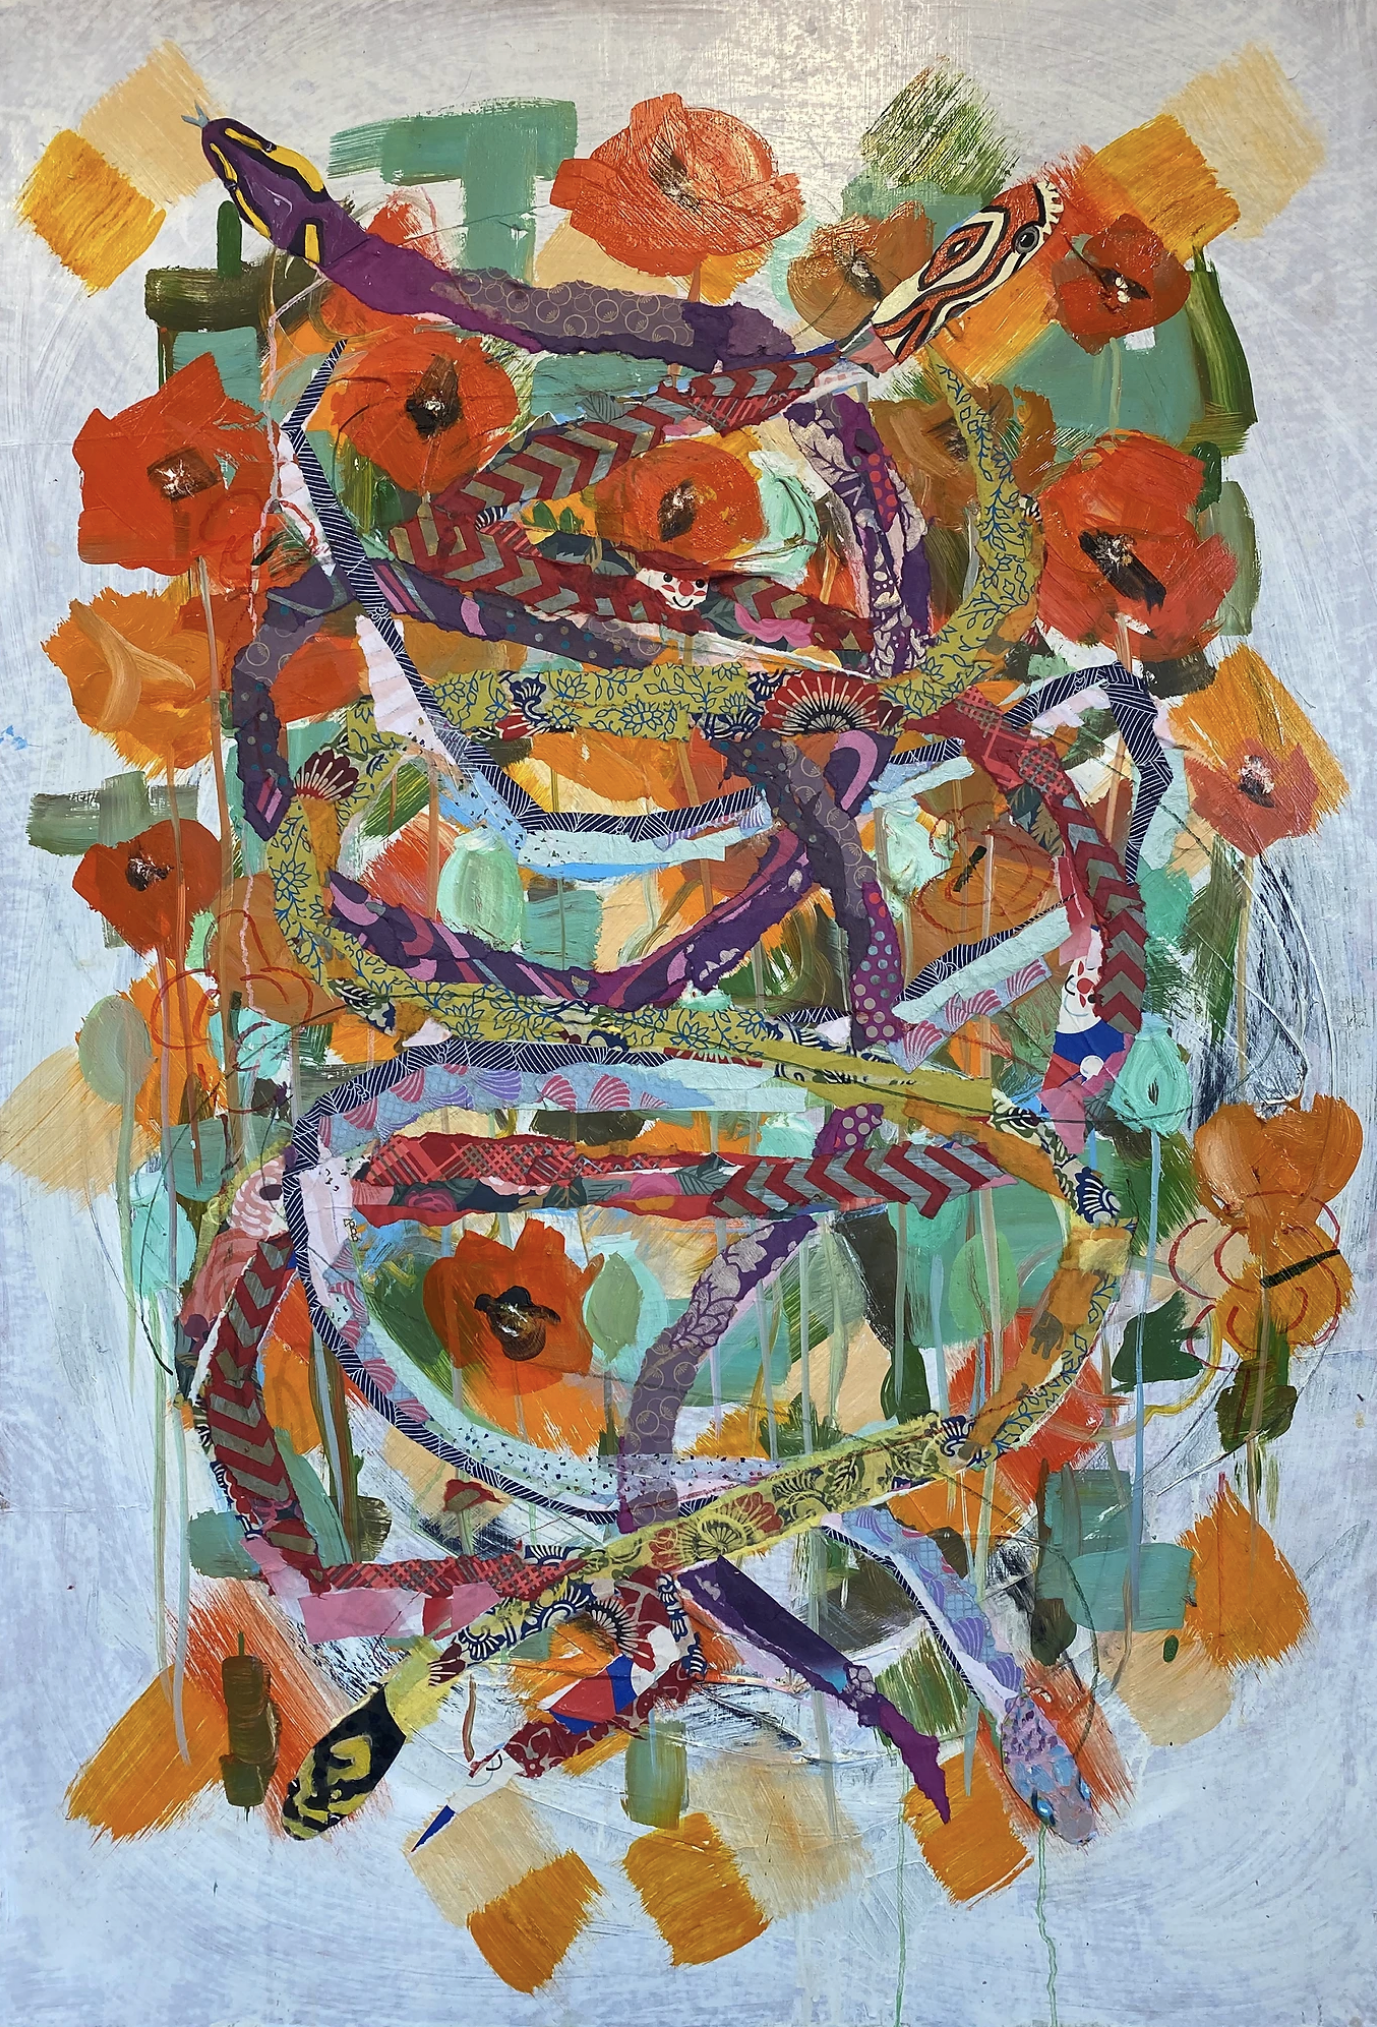 Poppy 2021 (30"x44") Mixed media collage and oil on panel board.